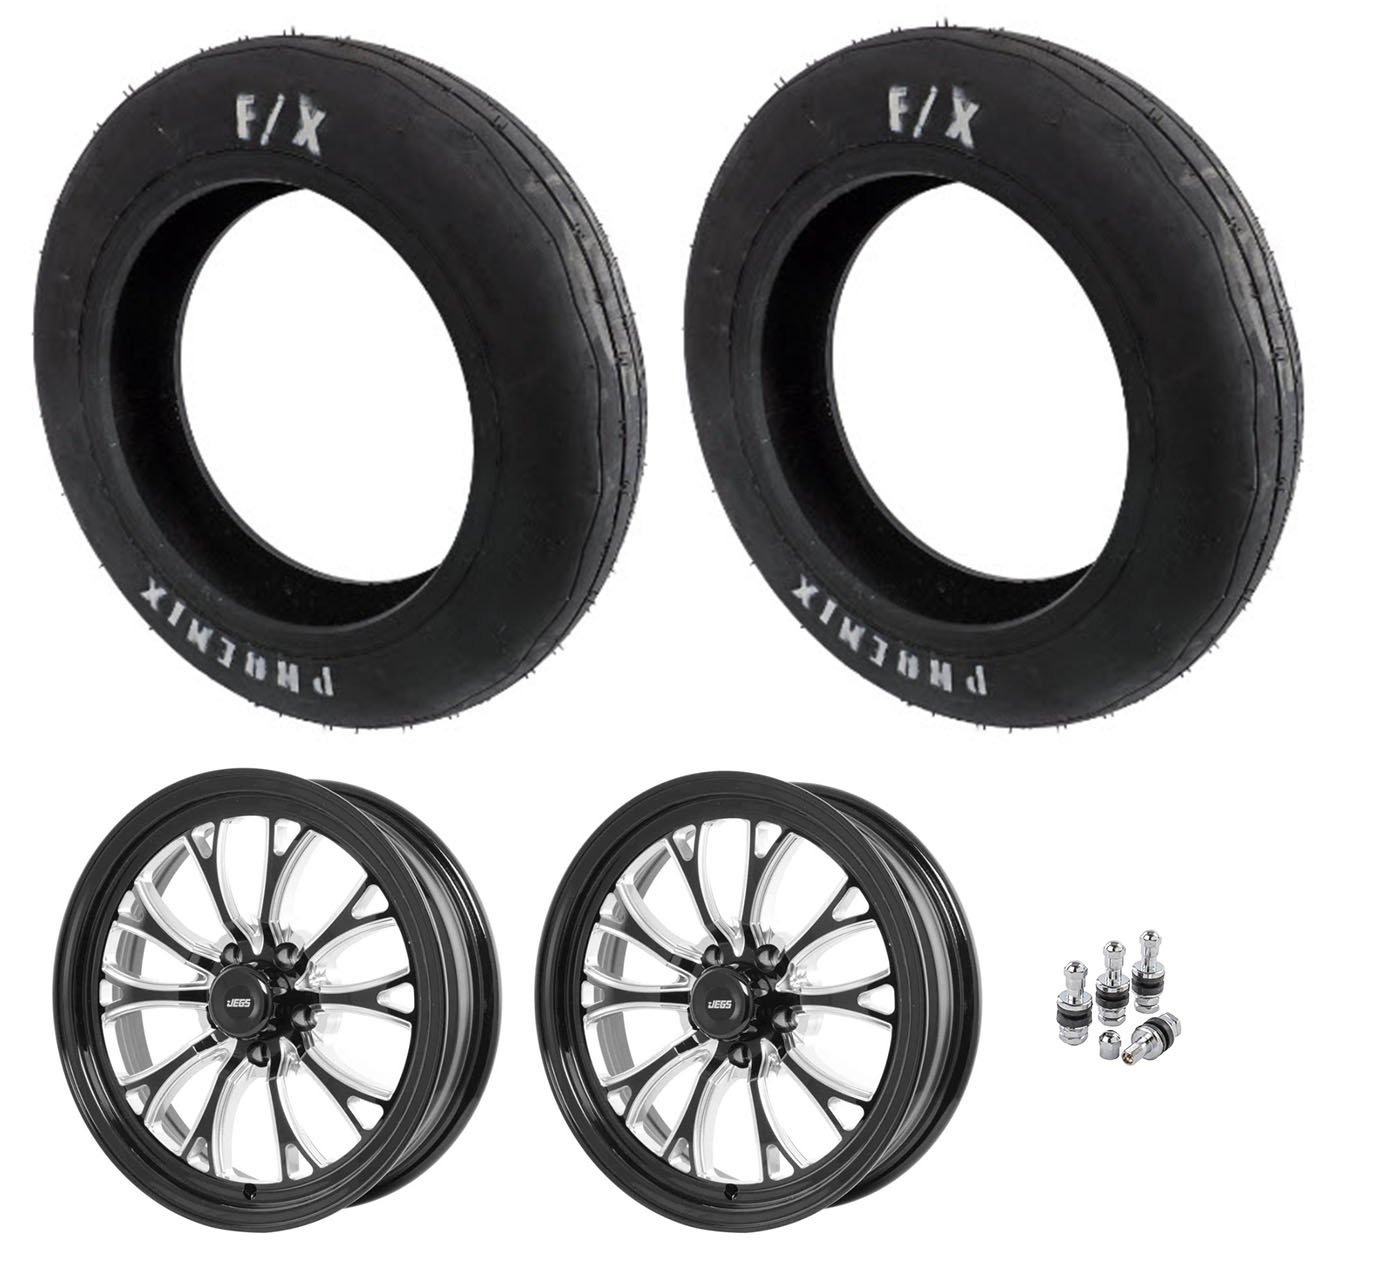 PH427 Front 27" Tires and JEGS SSR Spike Gloss Black Wheel Kit w/5 x 4.75" Wheel Bolt Pattern